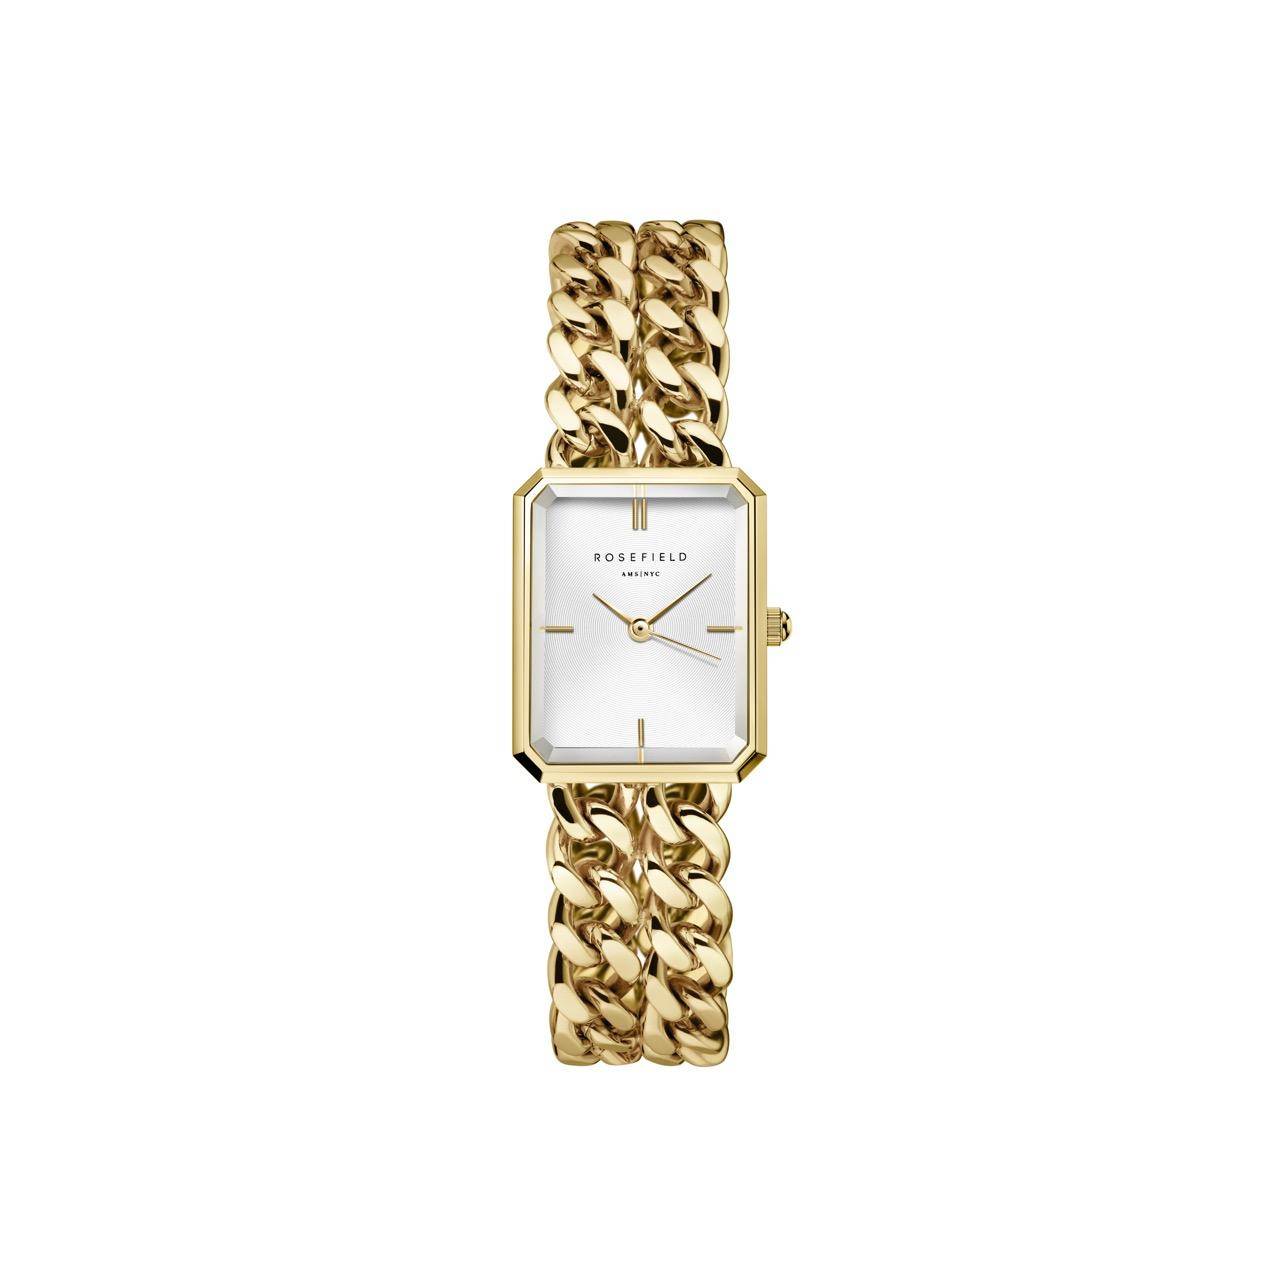 ROSEFIELD Women's Watch Octagon XS Double Chain Studio Edition White Gold SWGSG-O76